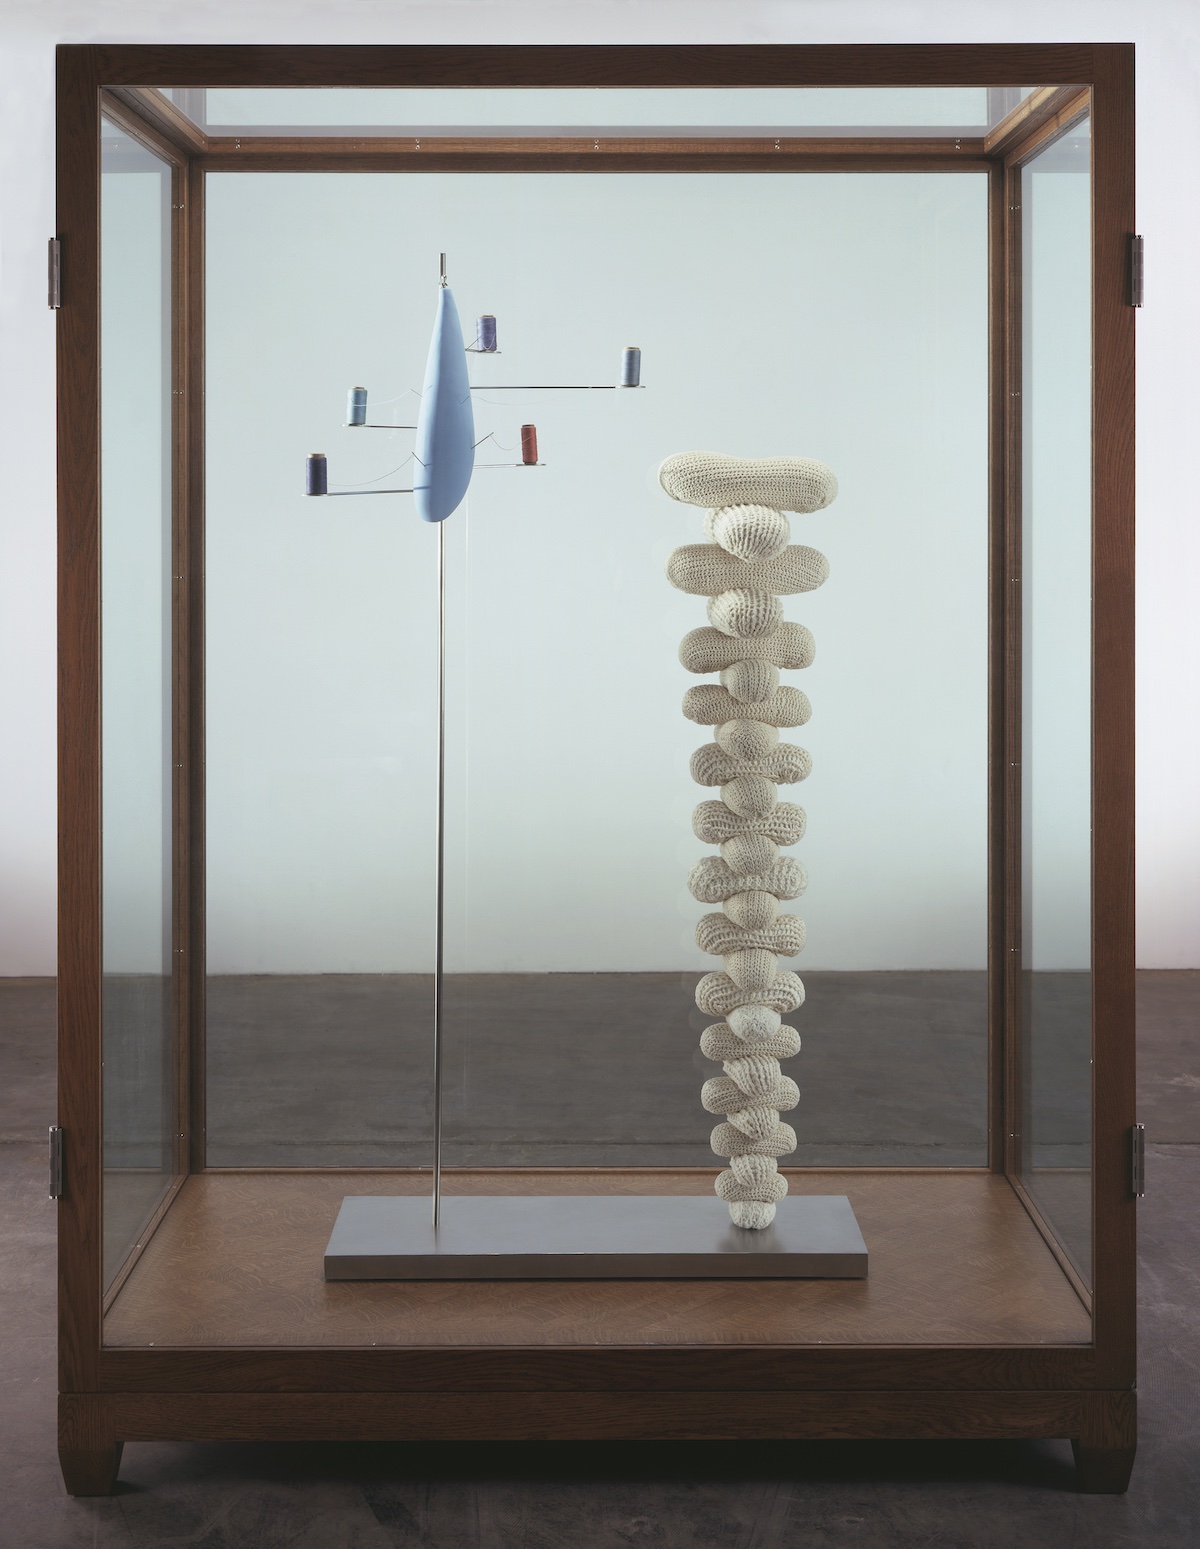 The Wick - Louise Bourgeois
Conscious and Unconscious, 2008
Fabric, rubber, thread and stainless steel
175.3 x 94 x 47 cm.
© The Easton Foundation/VAGA at ARS, NY and DACS, London 2021. Photo: Christopher Burke